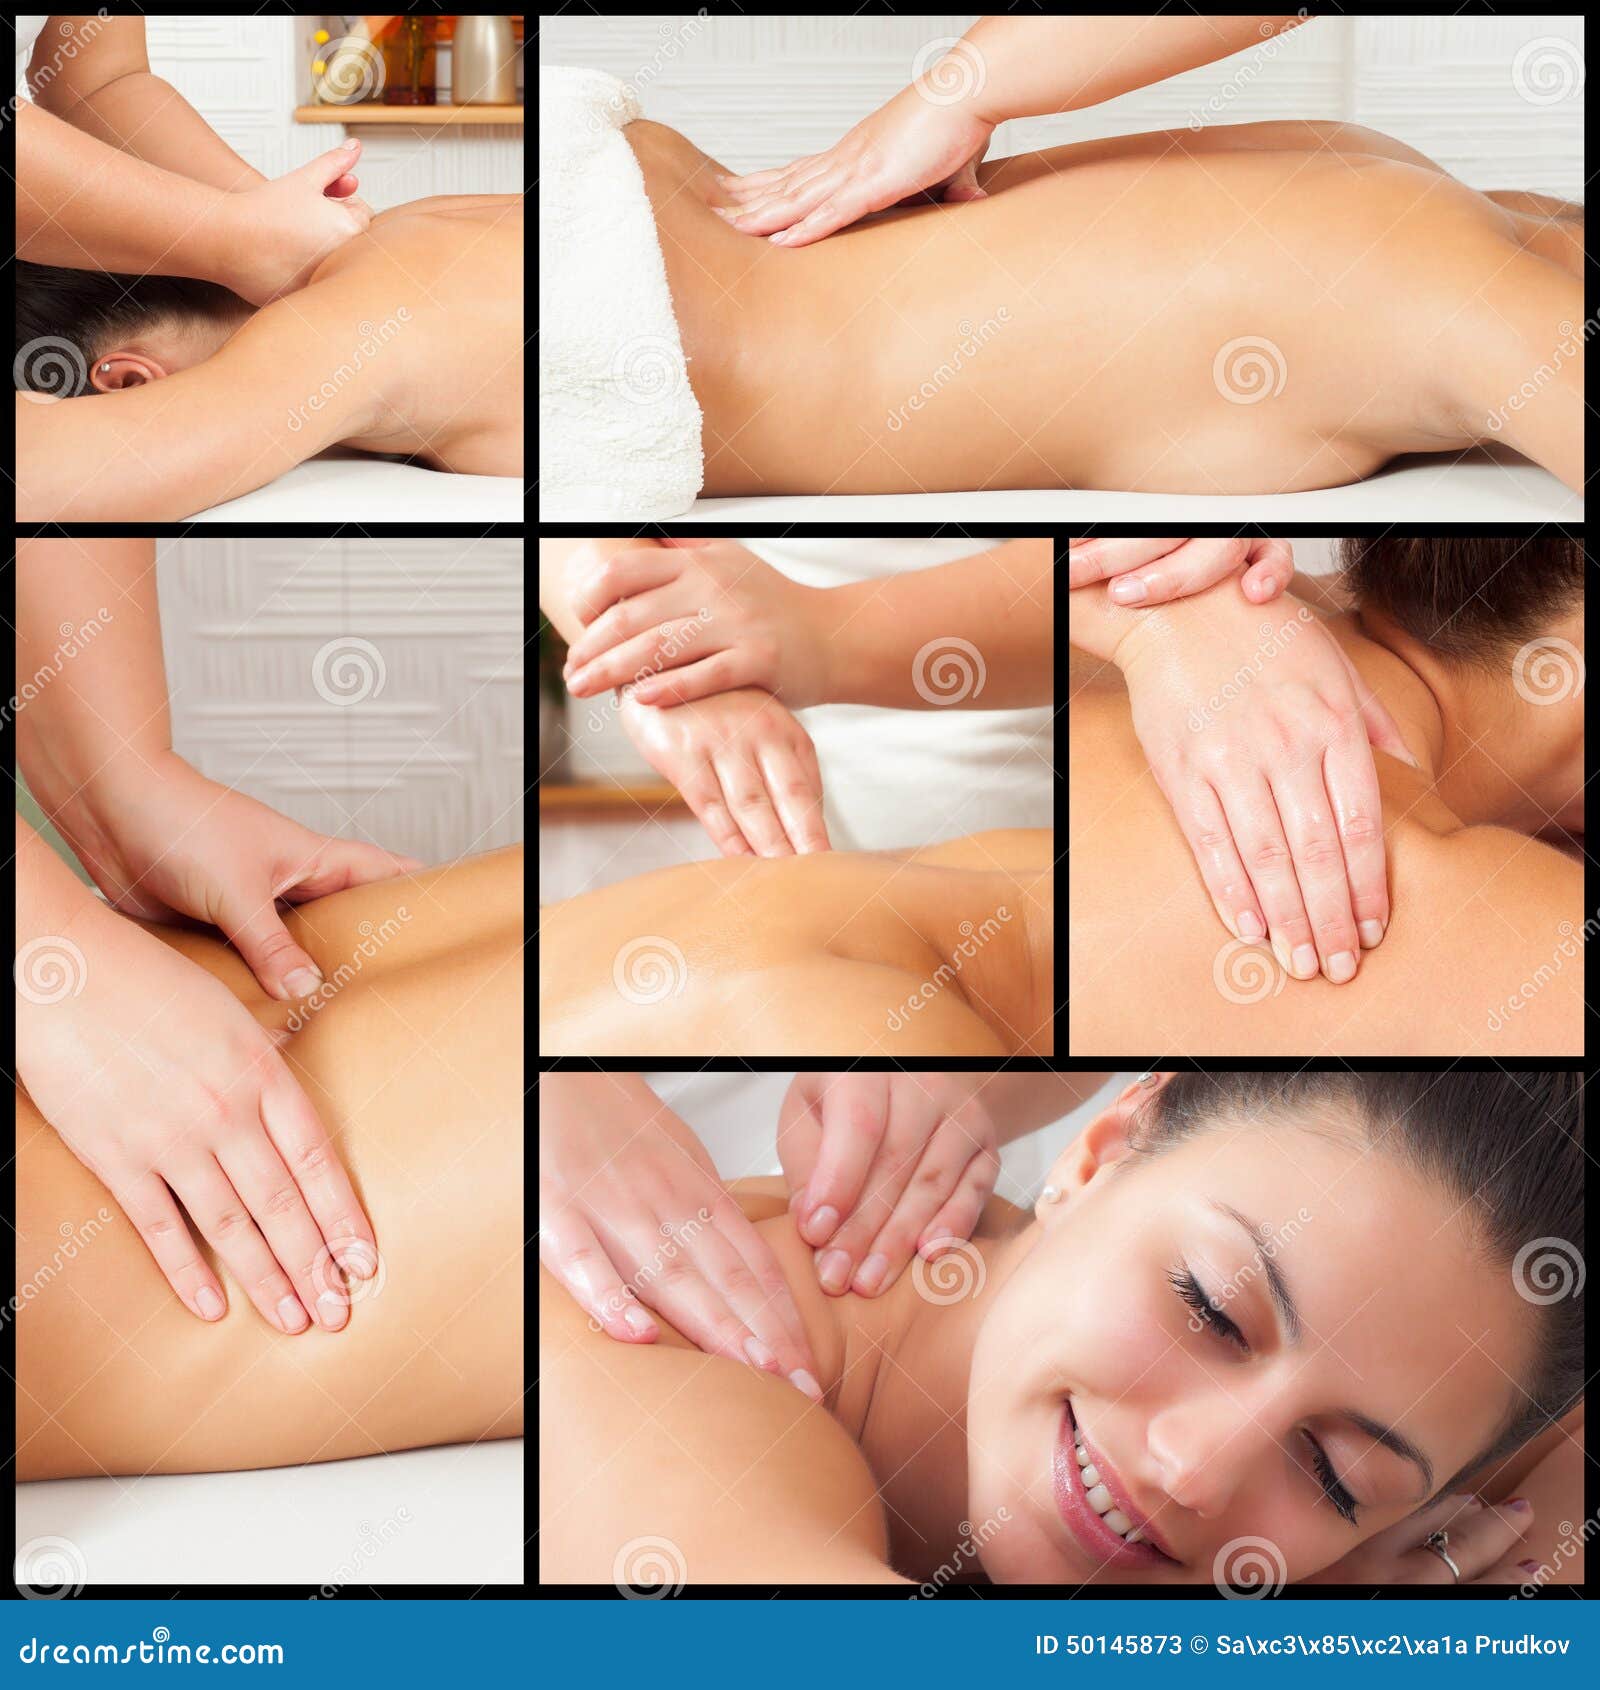 collage - young woman enjoying back massage in beauty spa